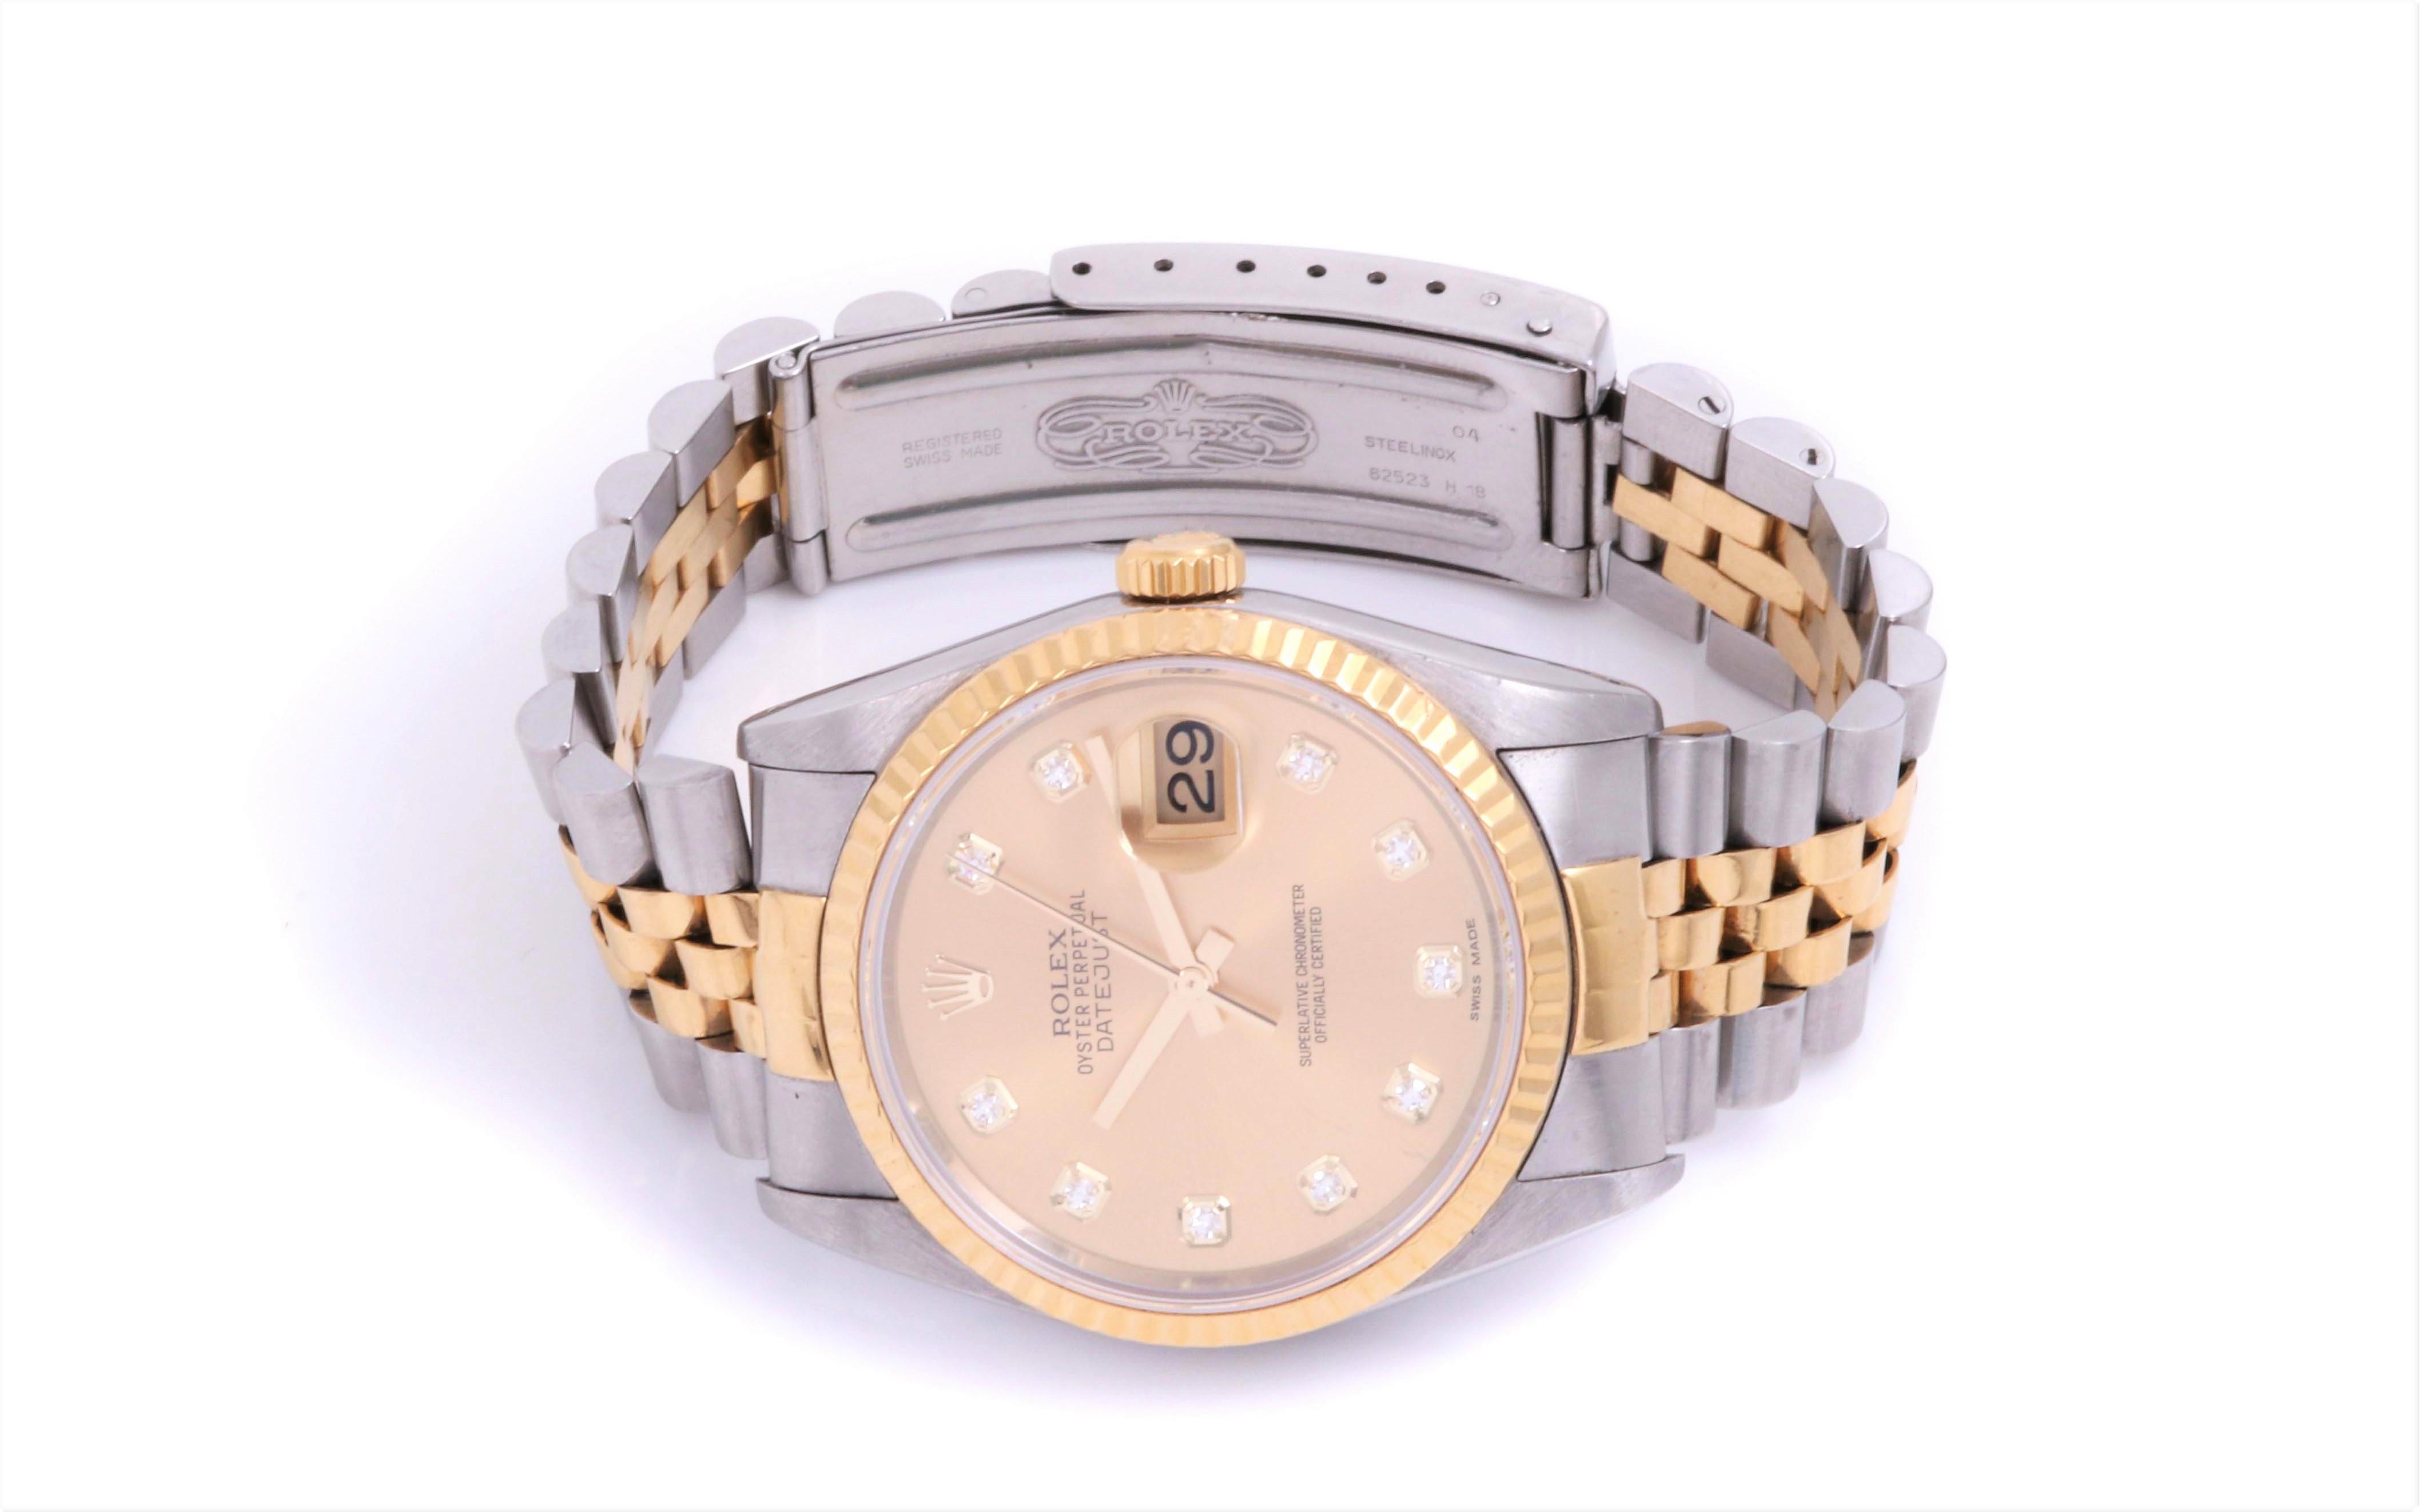 (Watch Description)
Brand - Rolex
Gender - Unisex
Model - 16013 Datejust
Metals - Yellow Gold / Steel 
Case size - 36mm
Bezel -Yellow Gold Fluted
Crystal - Acrylic
Movement - Automatic caliber 3035
Dial - Refinished Champagne Diamond
Wrist band -